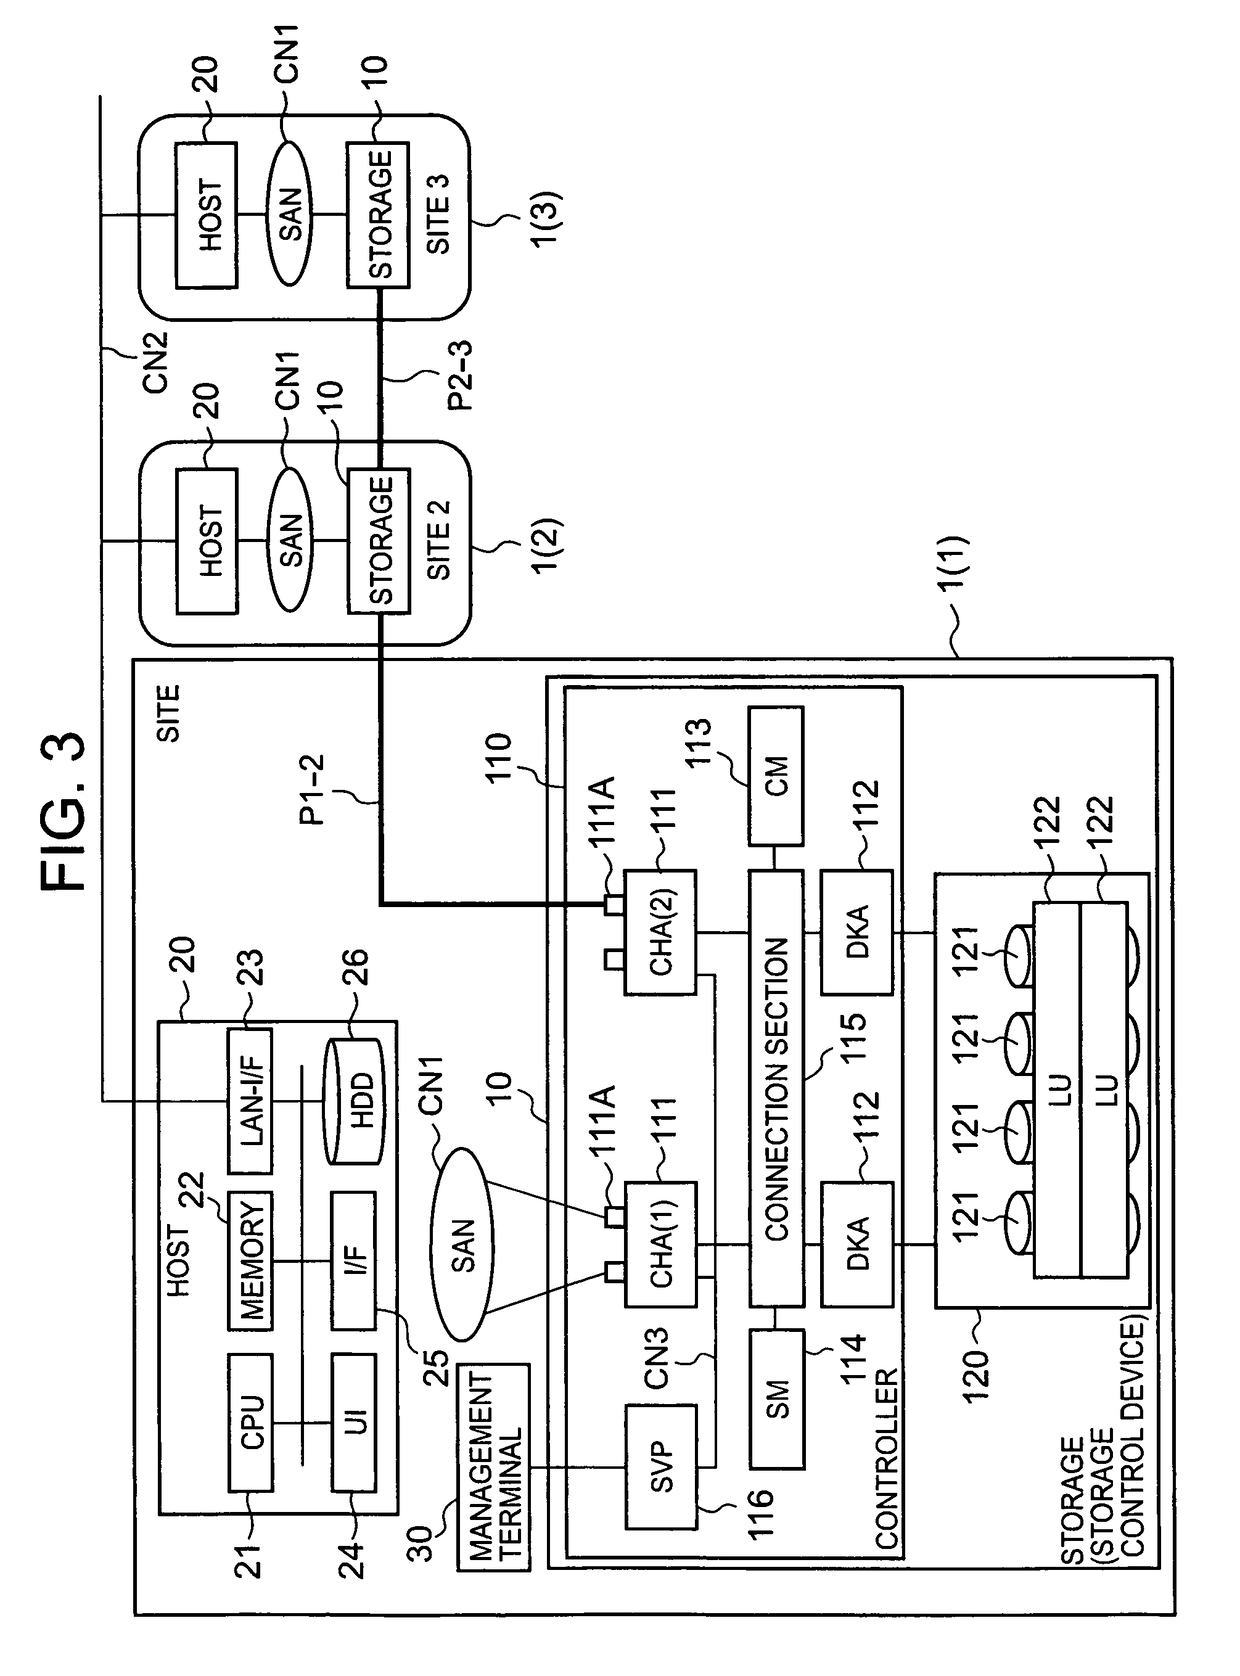 Storage system and method of designing disaster recovery constitution